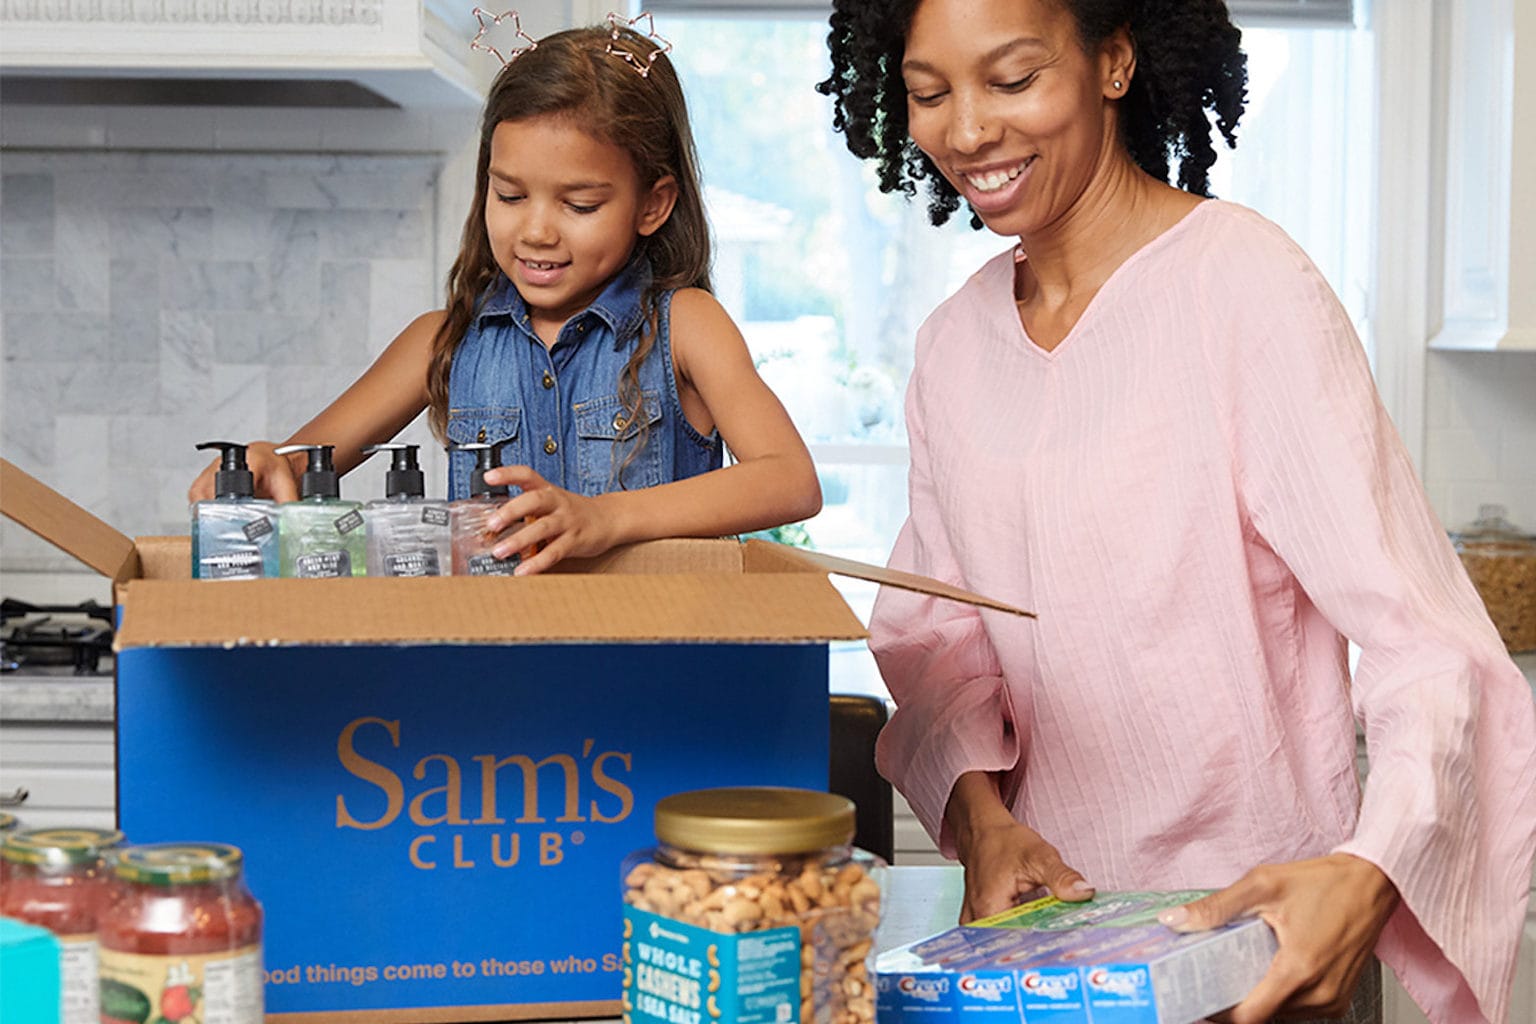 Get a 1-year Sam's Club membership for its Black Friday price early.